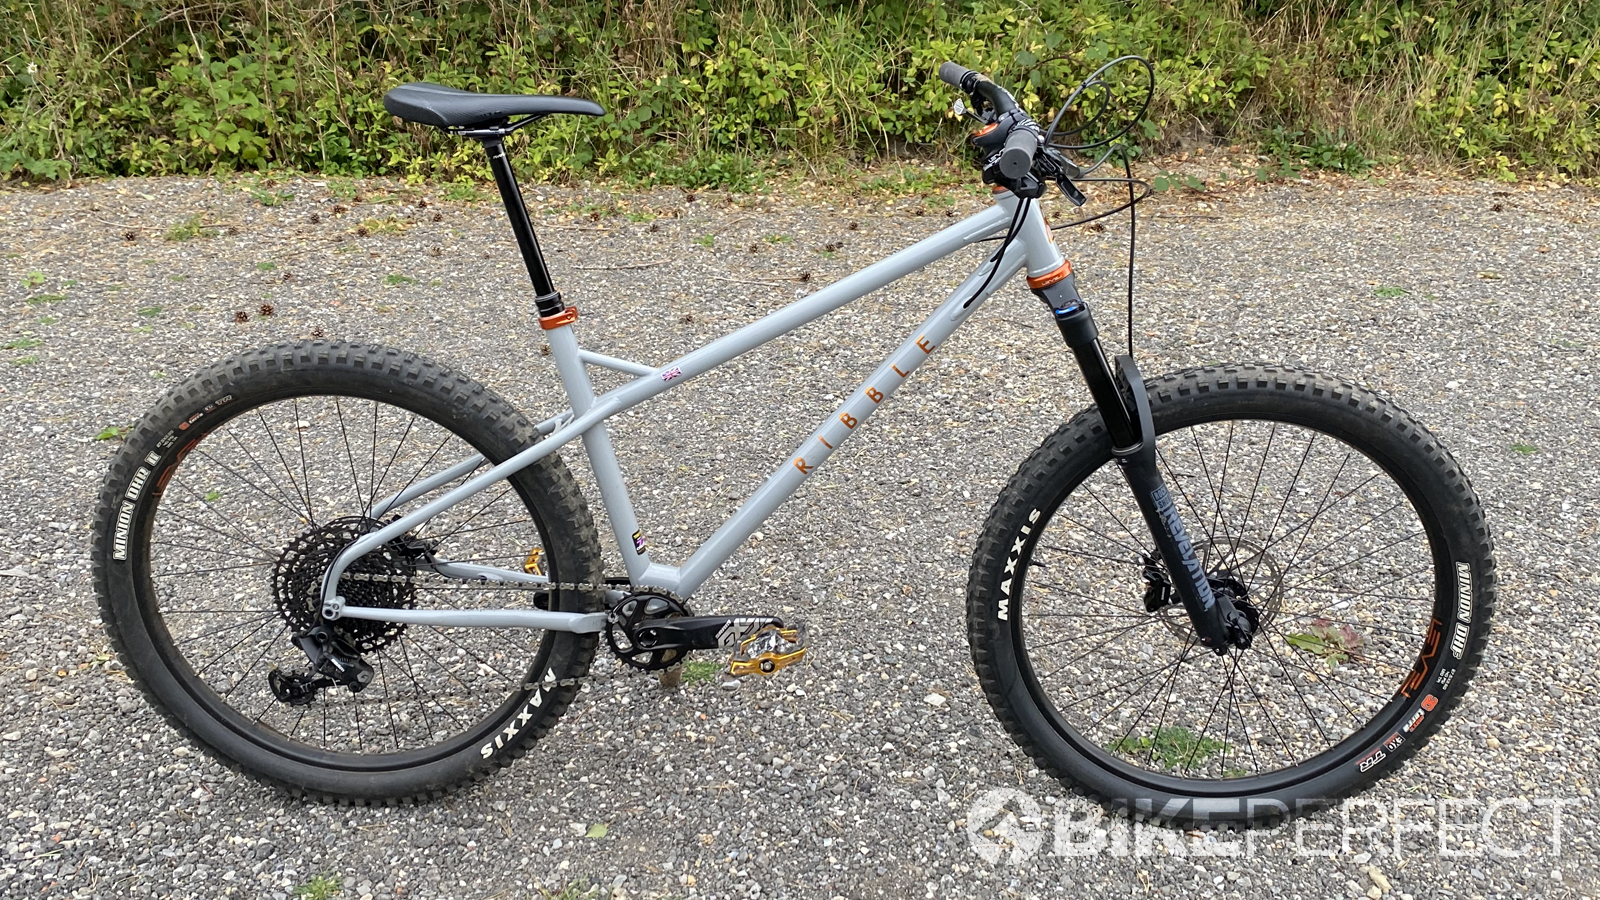 Post touw dier Ribble HT 725 Pro hardtail review | BikePerfect